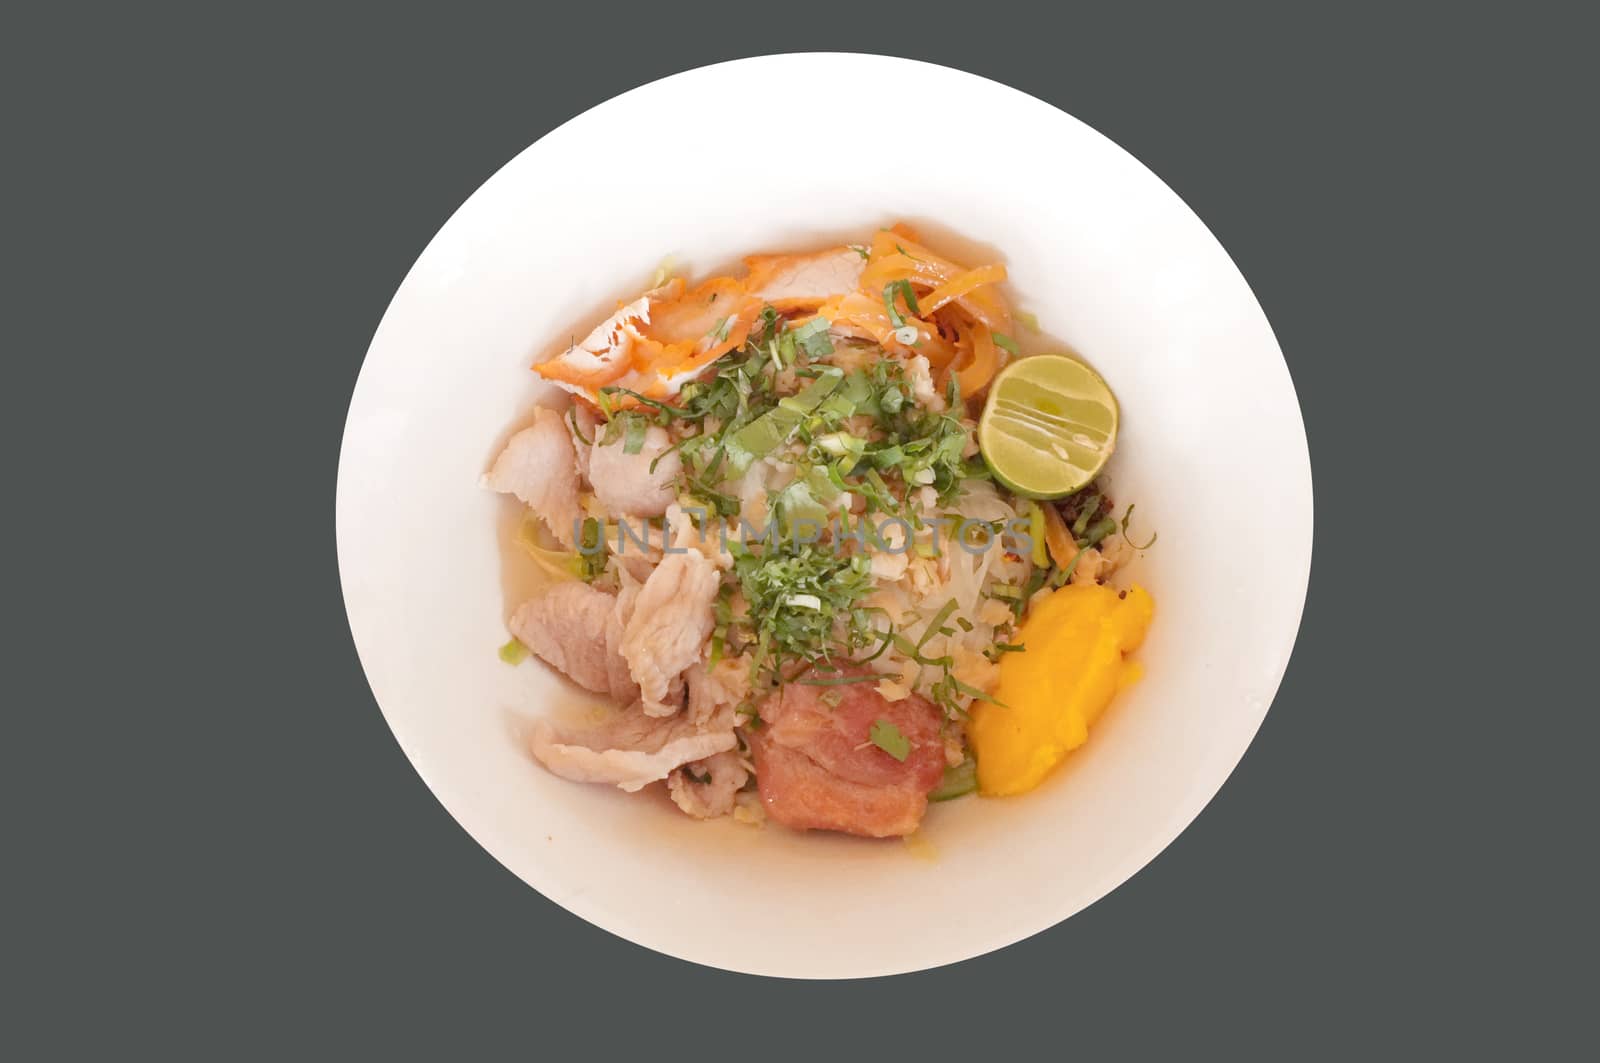 Delicious rice noodles with pork close-up on a plate